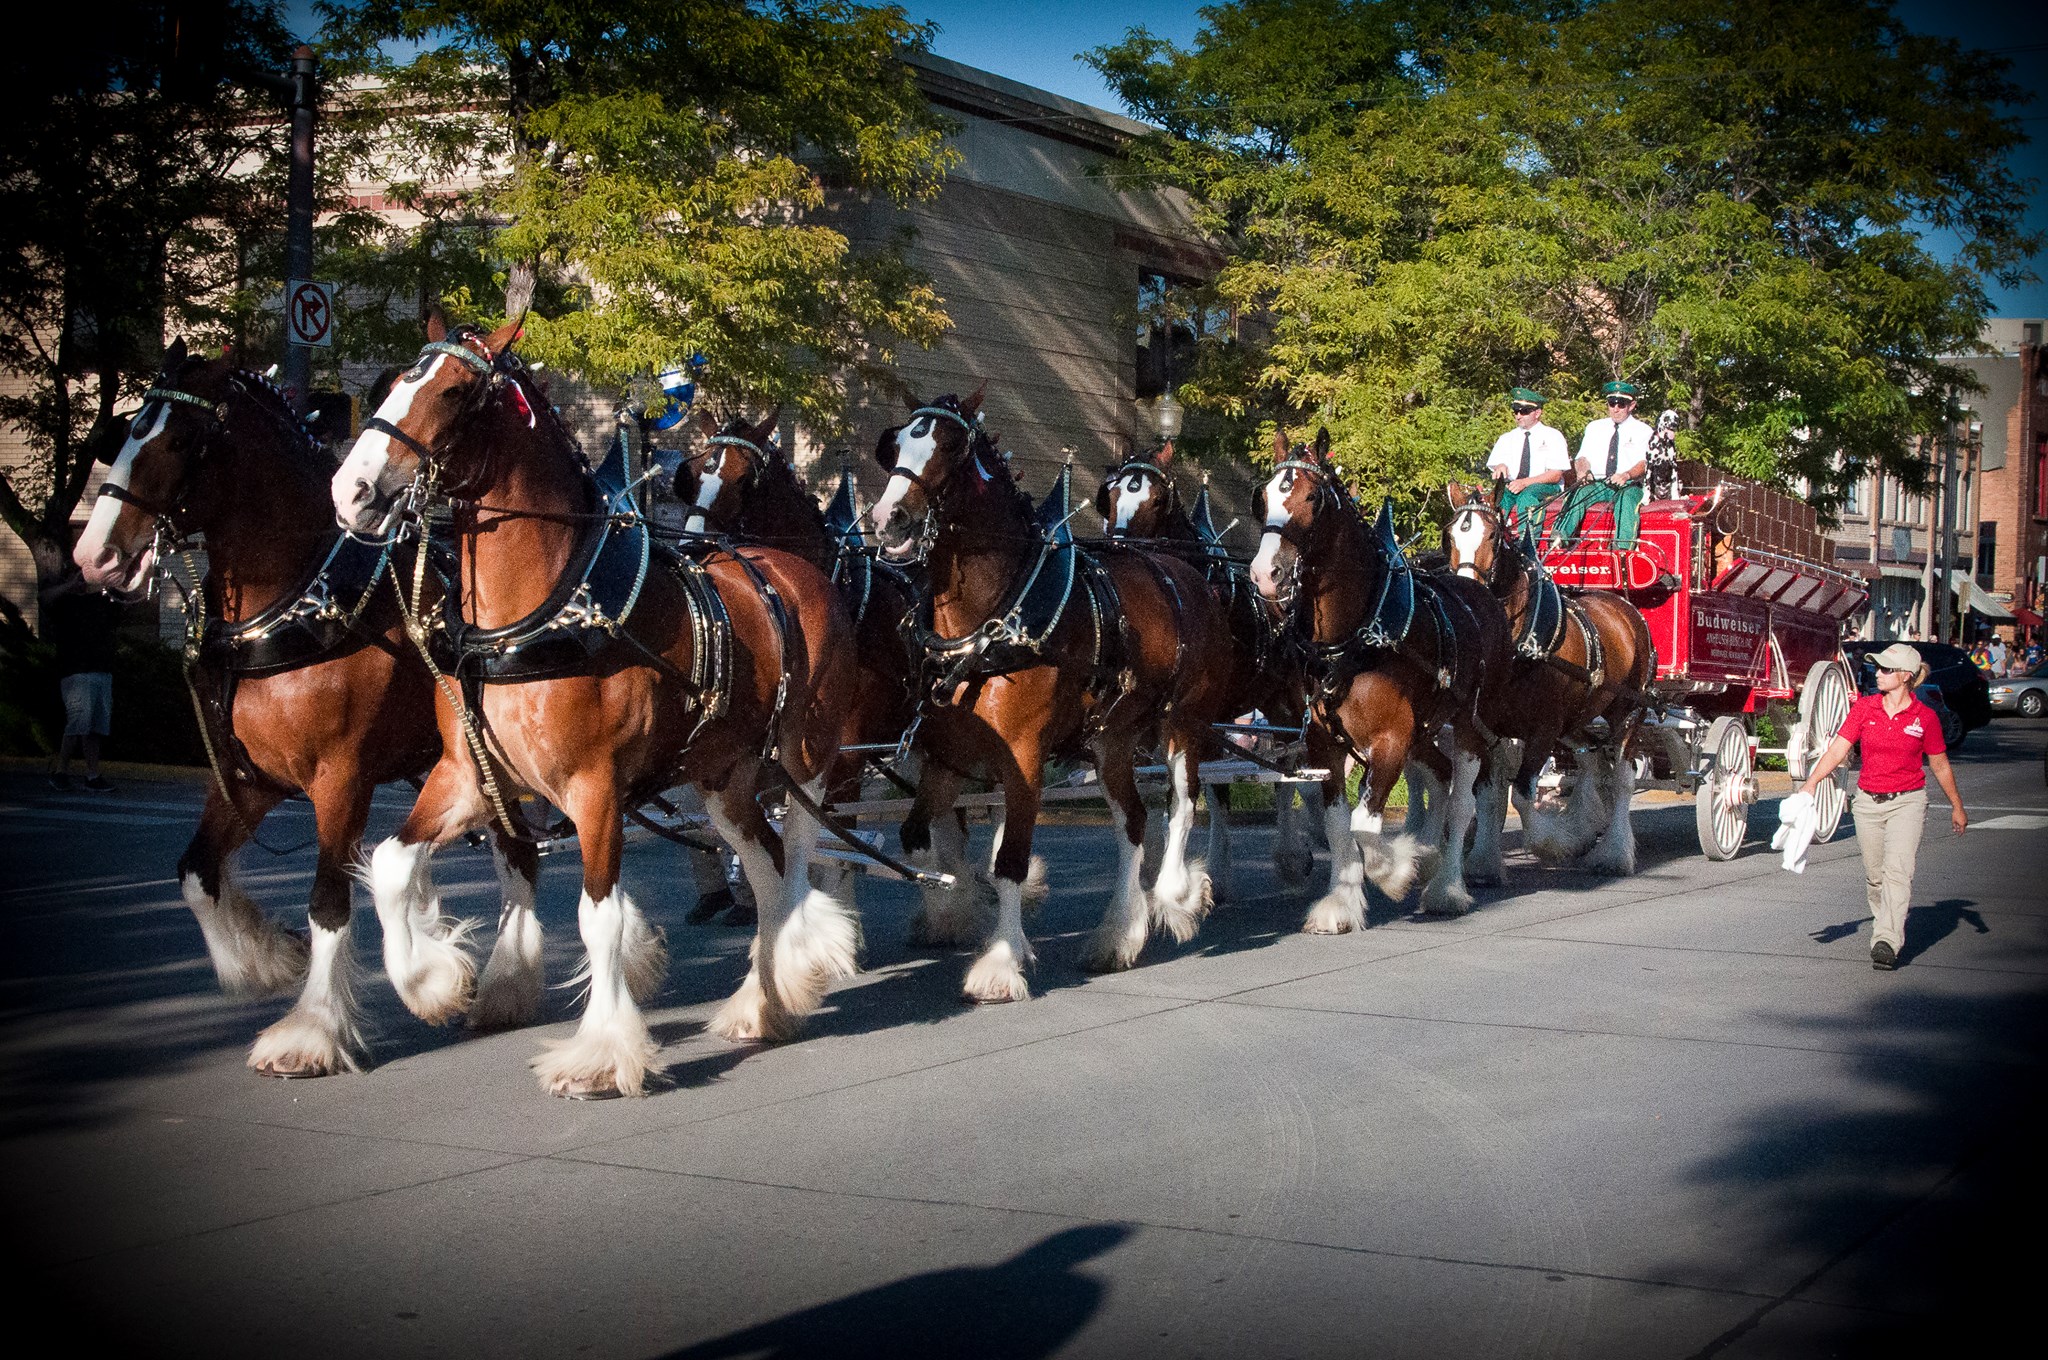 Budweiser Clydesdale Horses Wallpaper Budweiser clydesdale horses